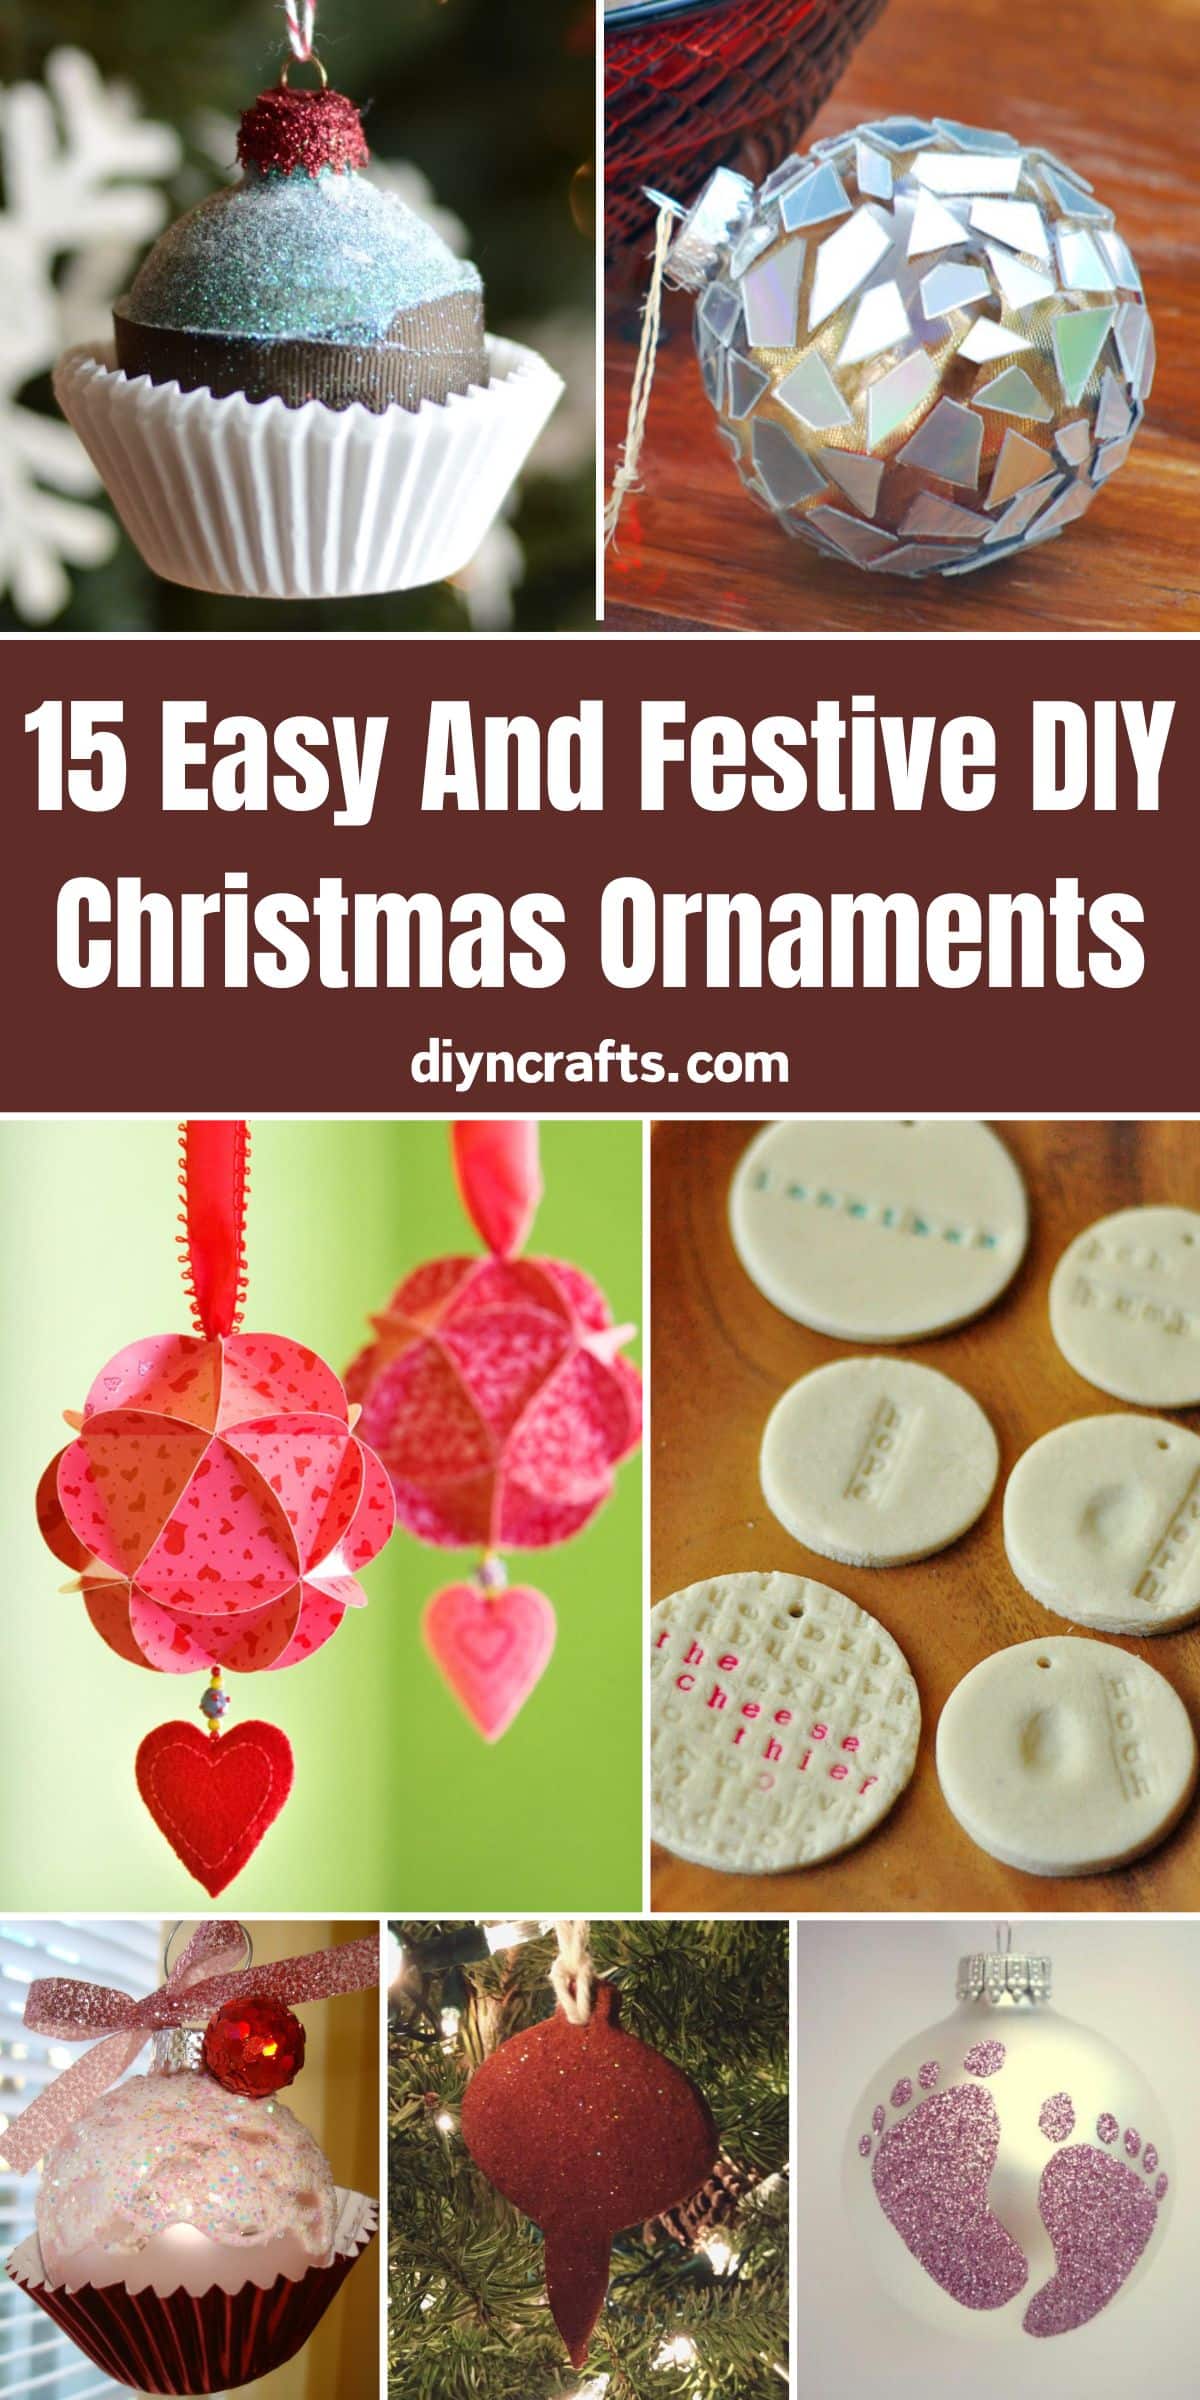 15 Easy And Festive DIY Christmas Ornaments collage.